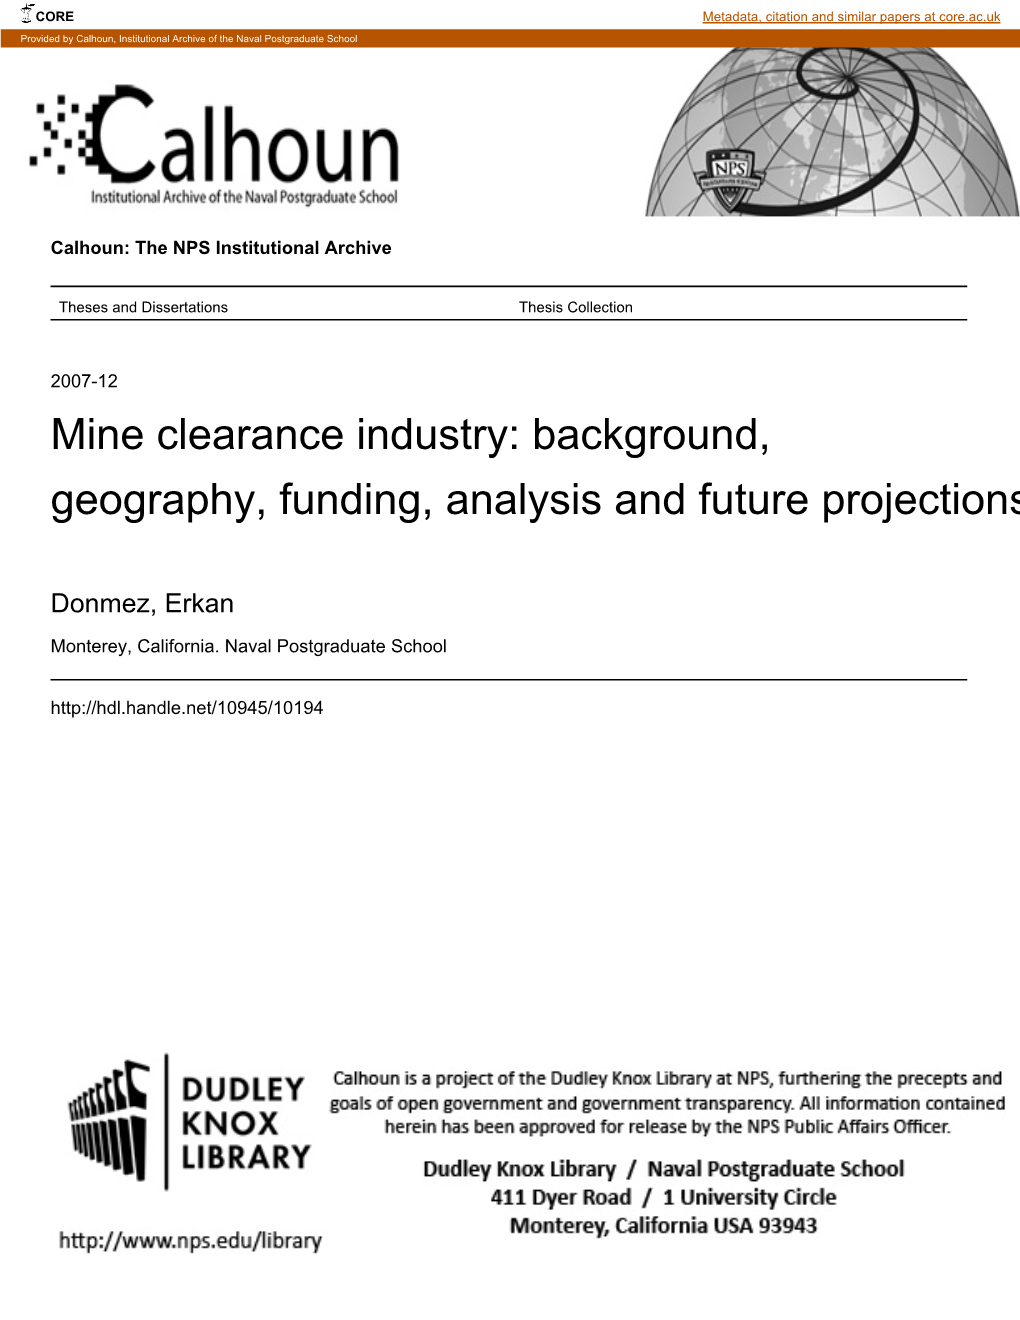 Mine Clearance Industry: Background, Geography, Funding, Analysis and Future Projections